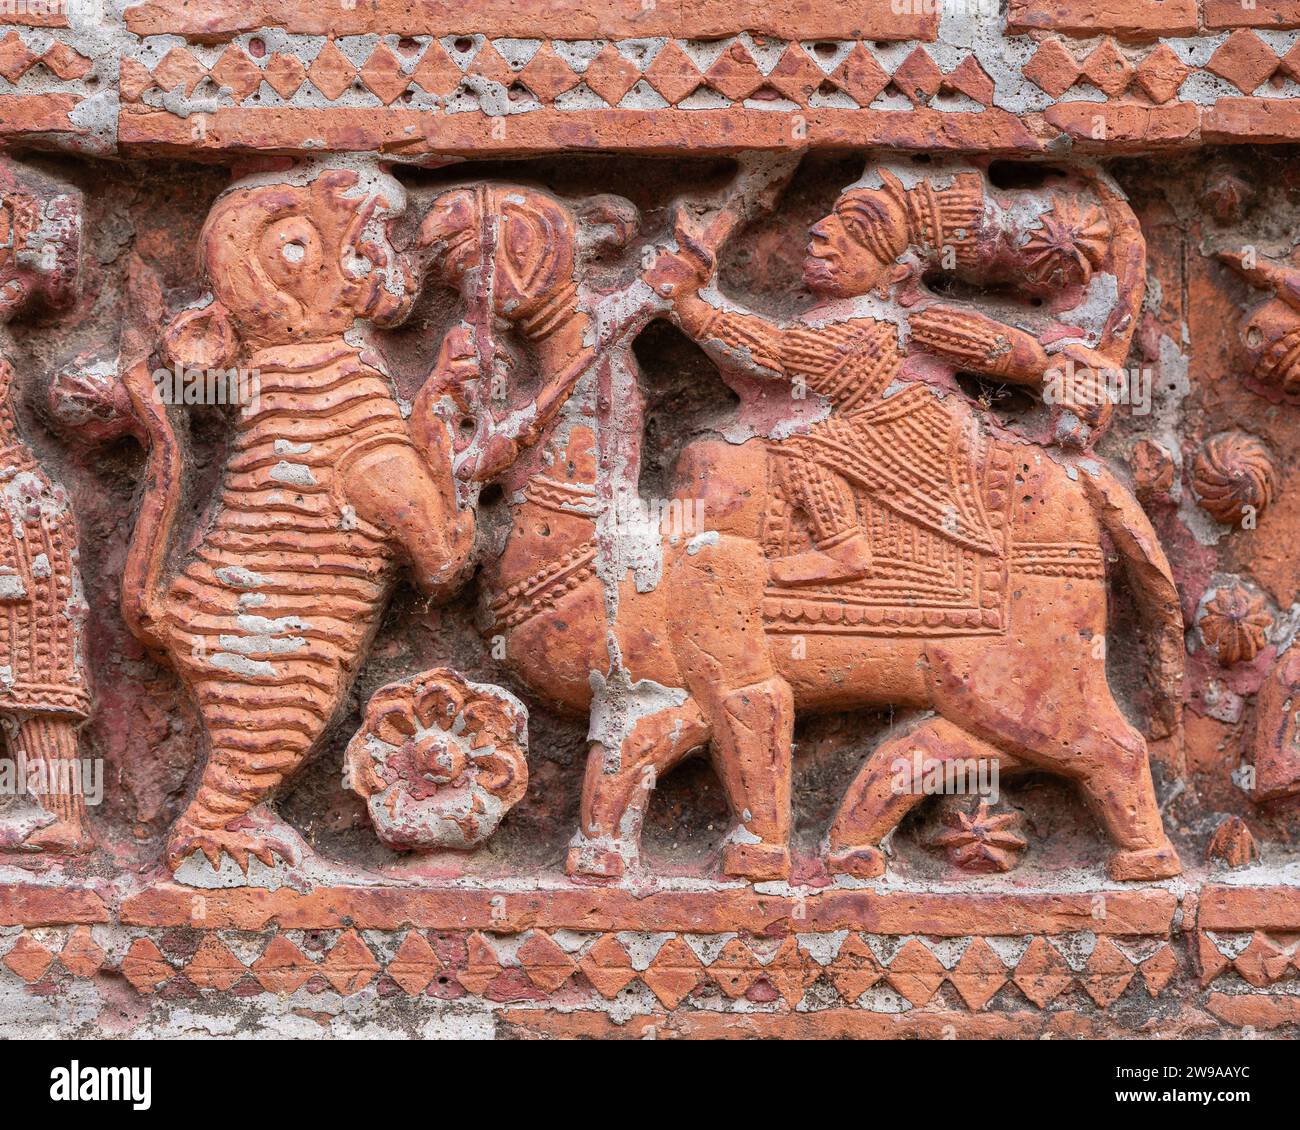 Closeup view of carved terracotta hunting scene with camel and tiger on ancient Govinda temple in Puthia religious complex, Rajshahi, Bangladesh Stock Photo